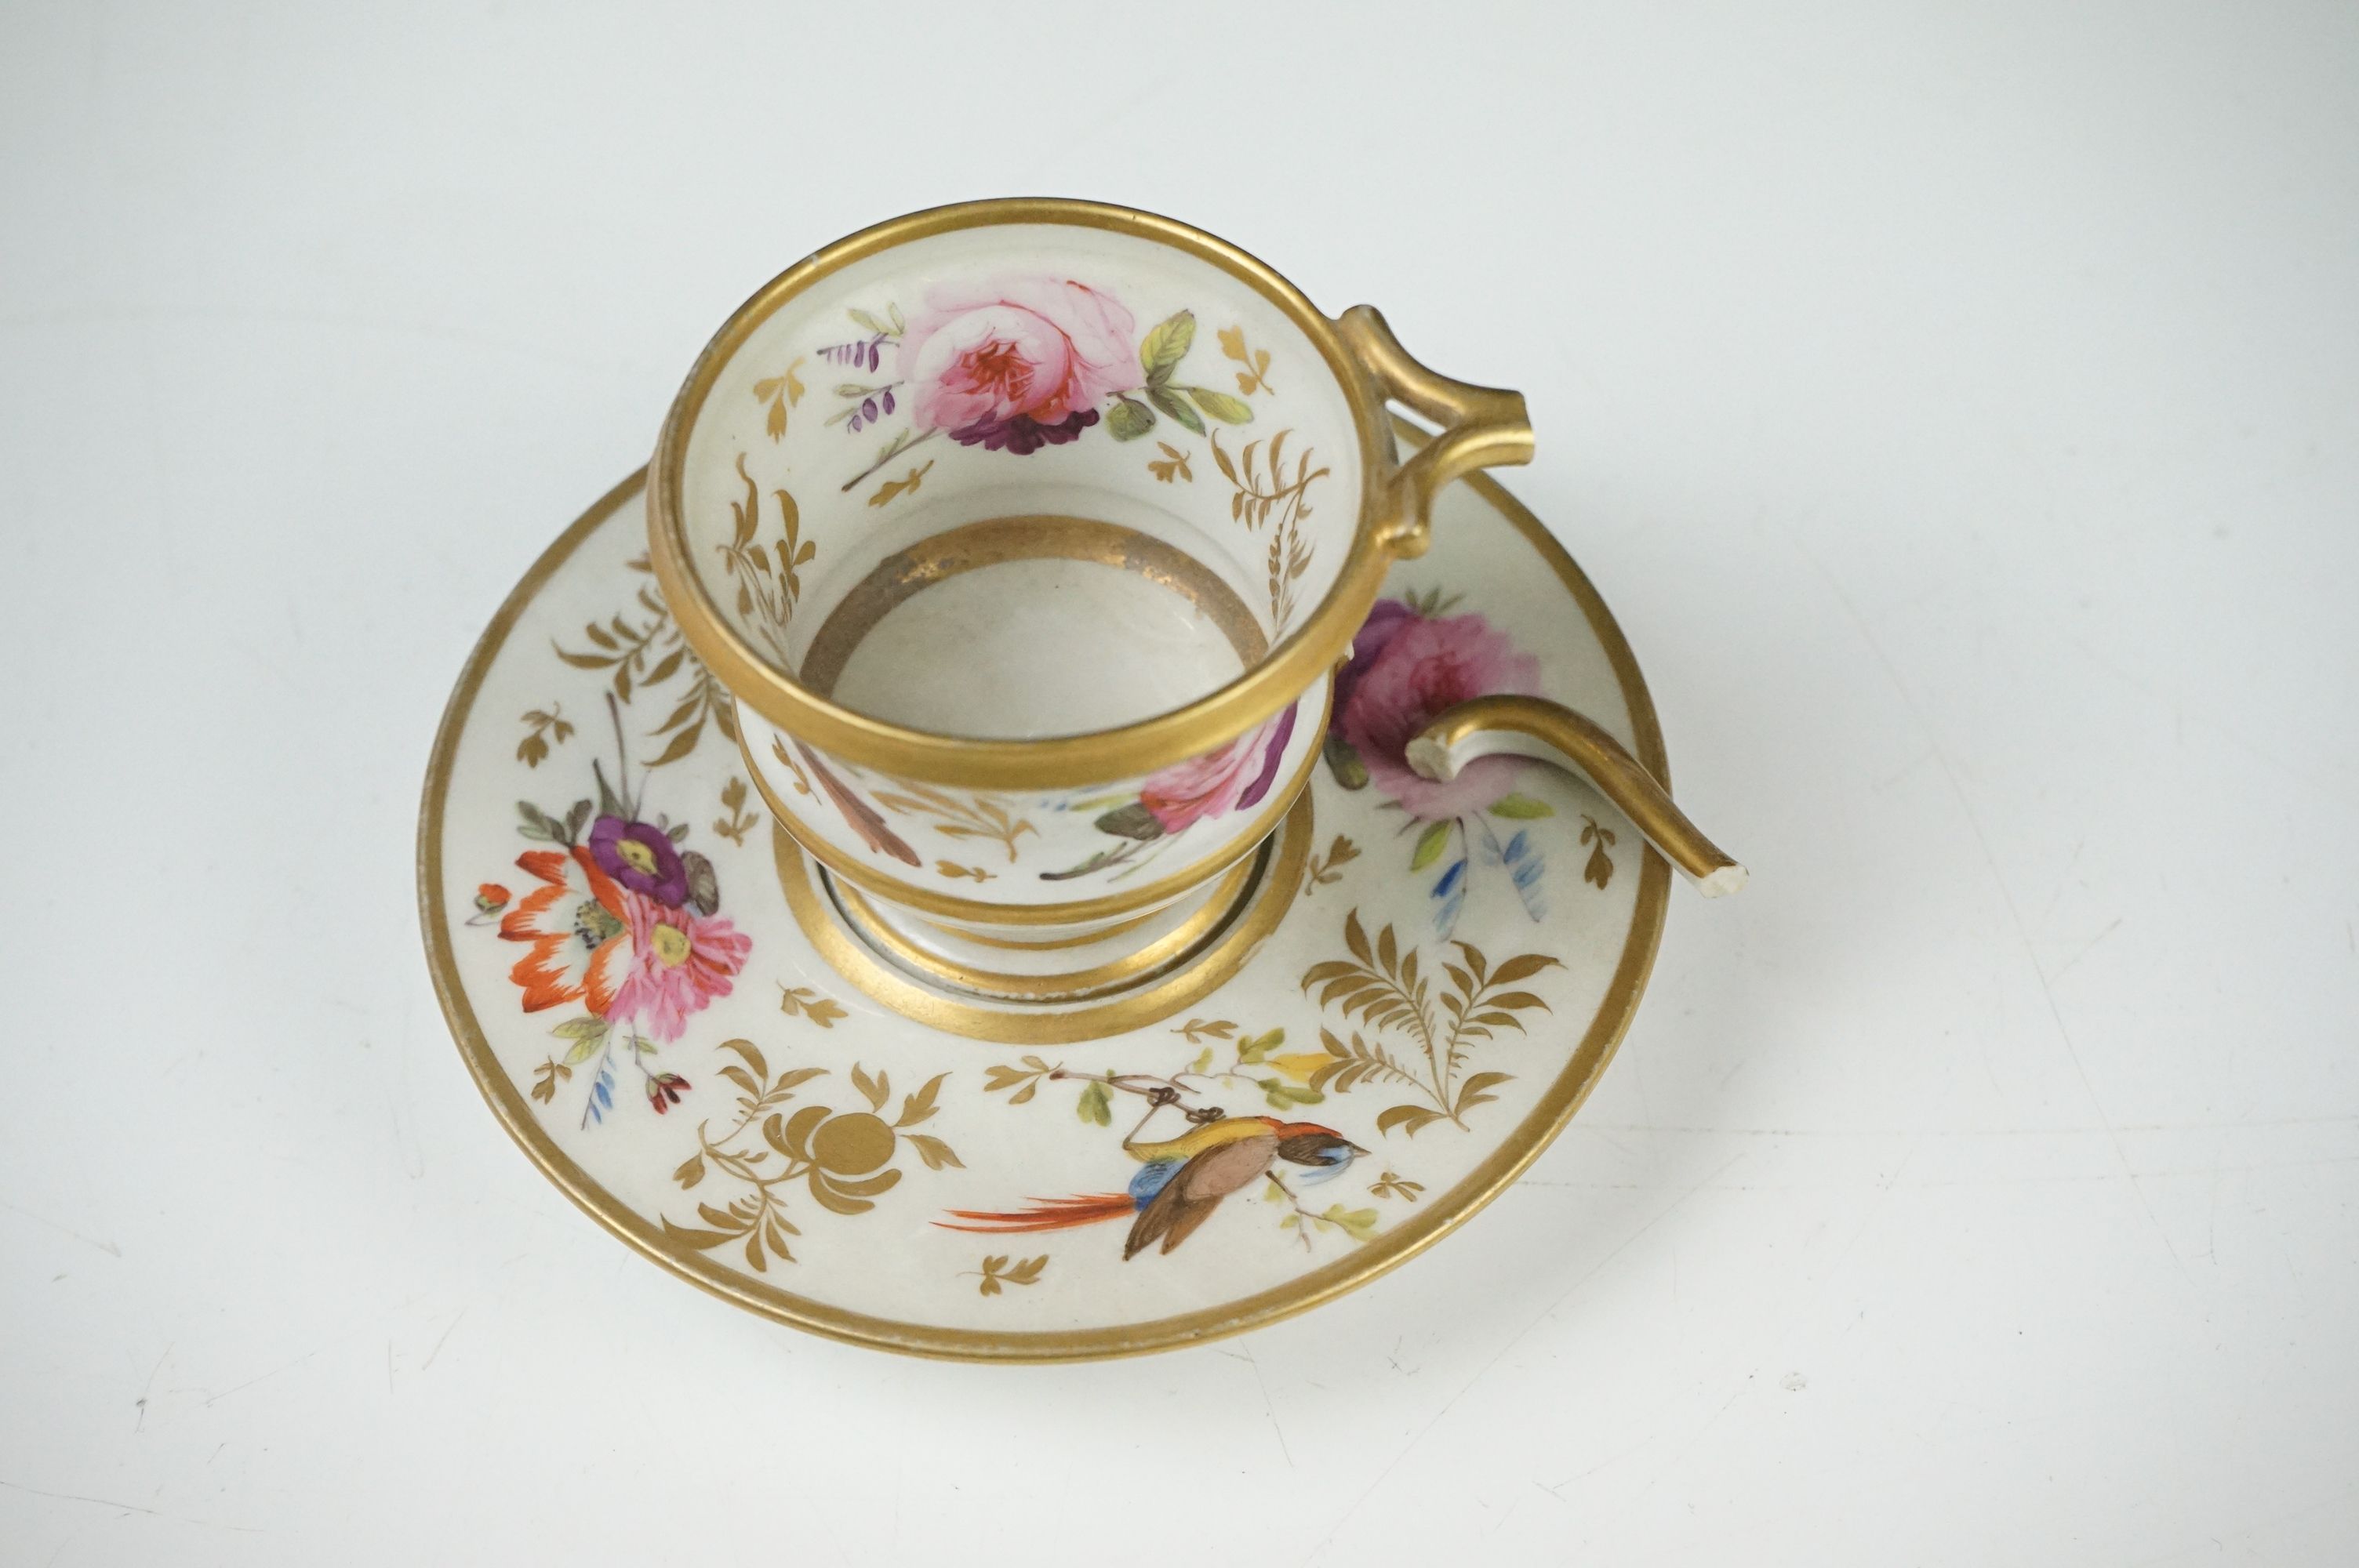 Pair of Continental Porcelain Cabinet Cups and Saucers decorated in gilt and enamels with flowers - Image 8 of 8